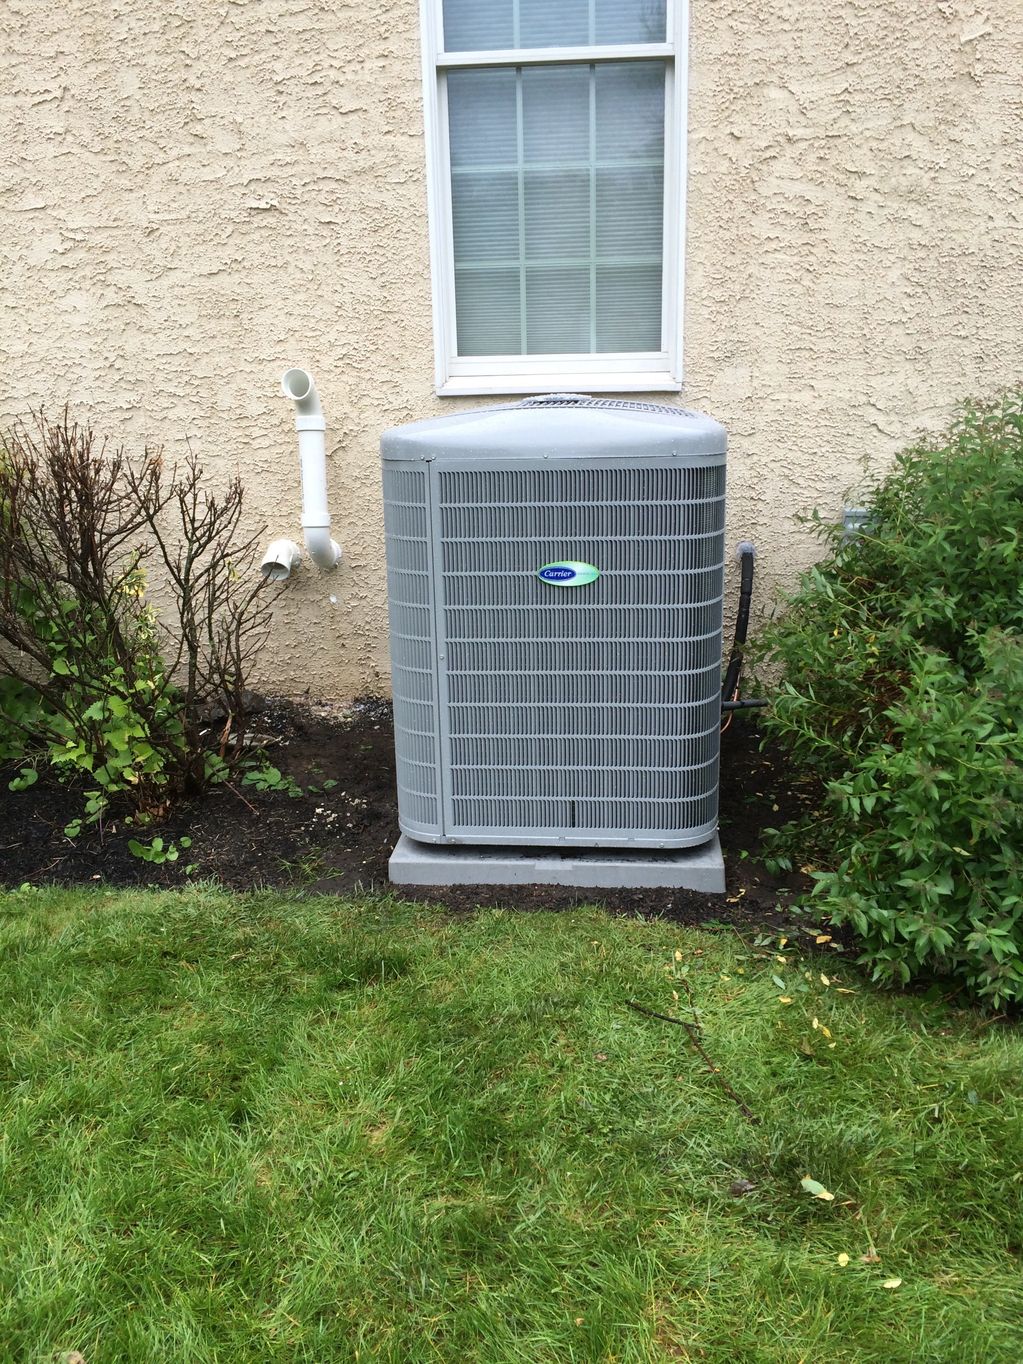 Outdoor High Efficiency Air Conditioning Unit
